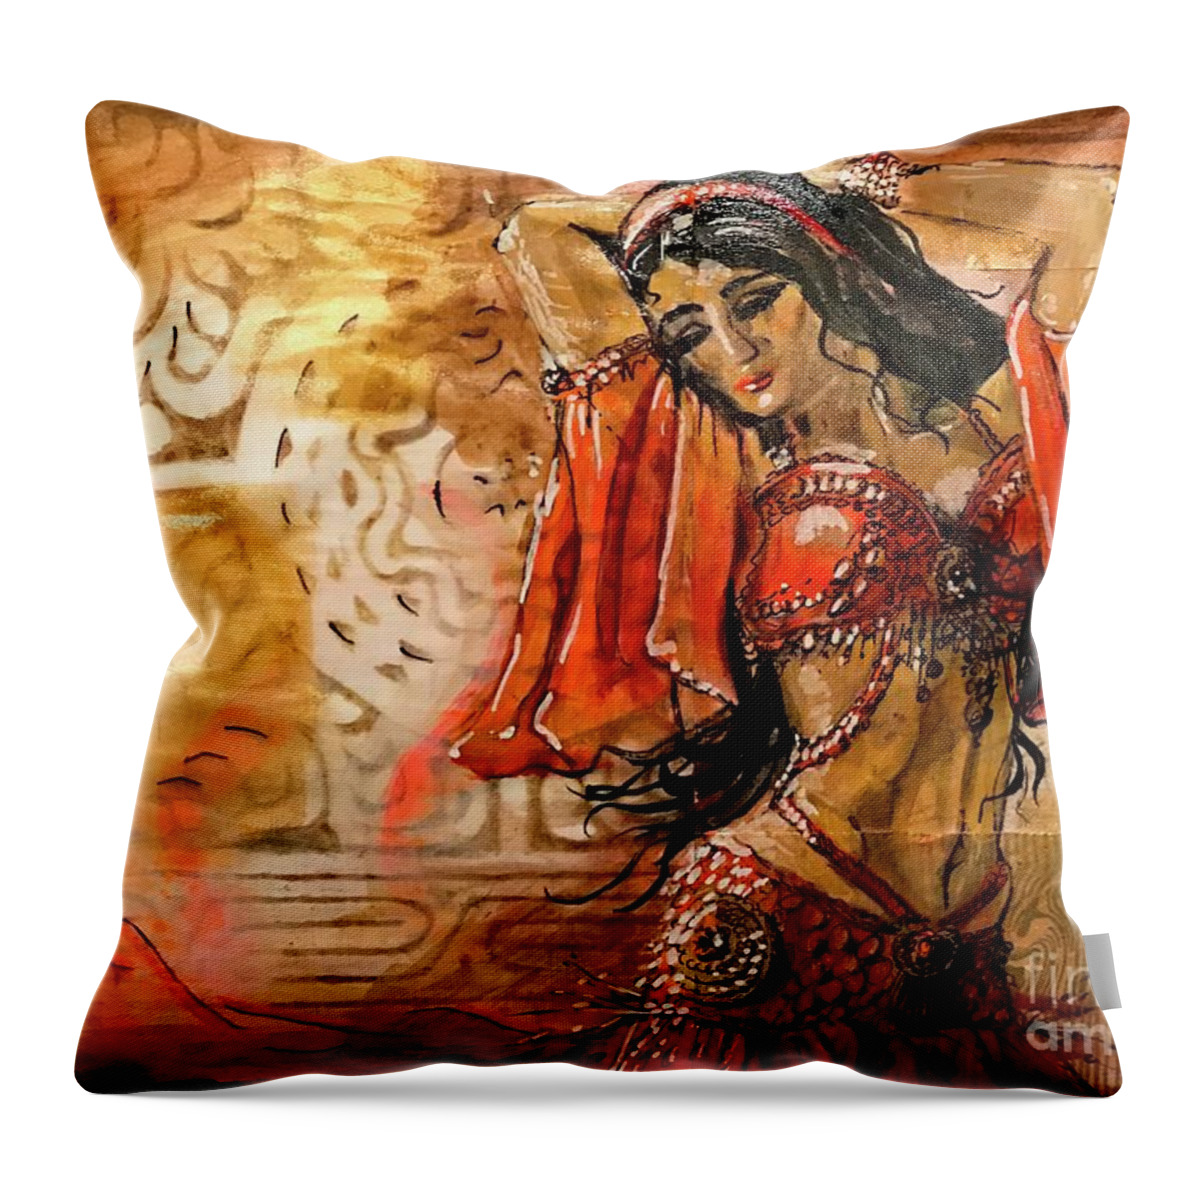 Arabic Throw Pillow featuring the painting Belly Dancer Collage 01 by Yvonne Ayoub